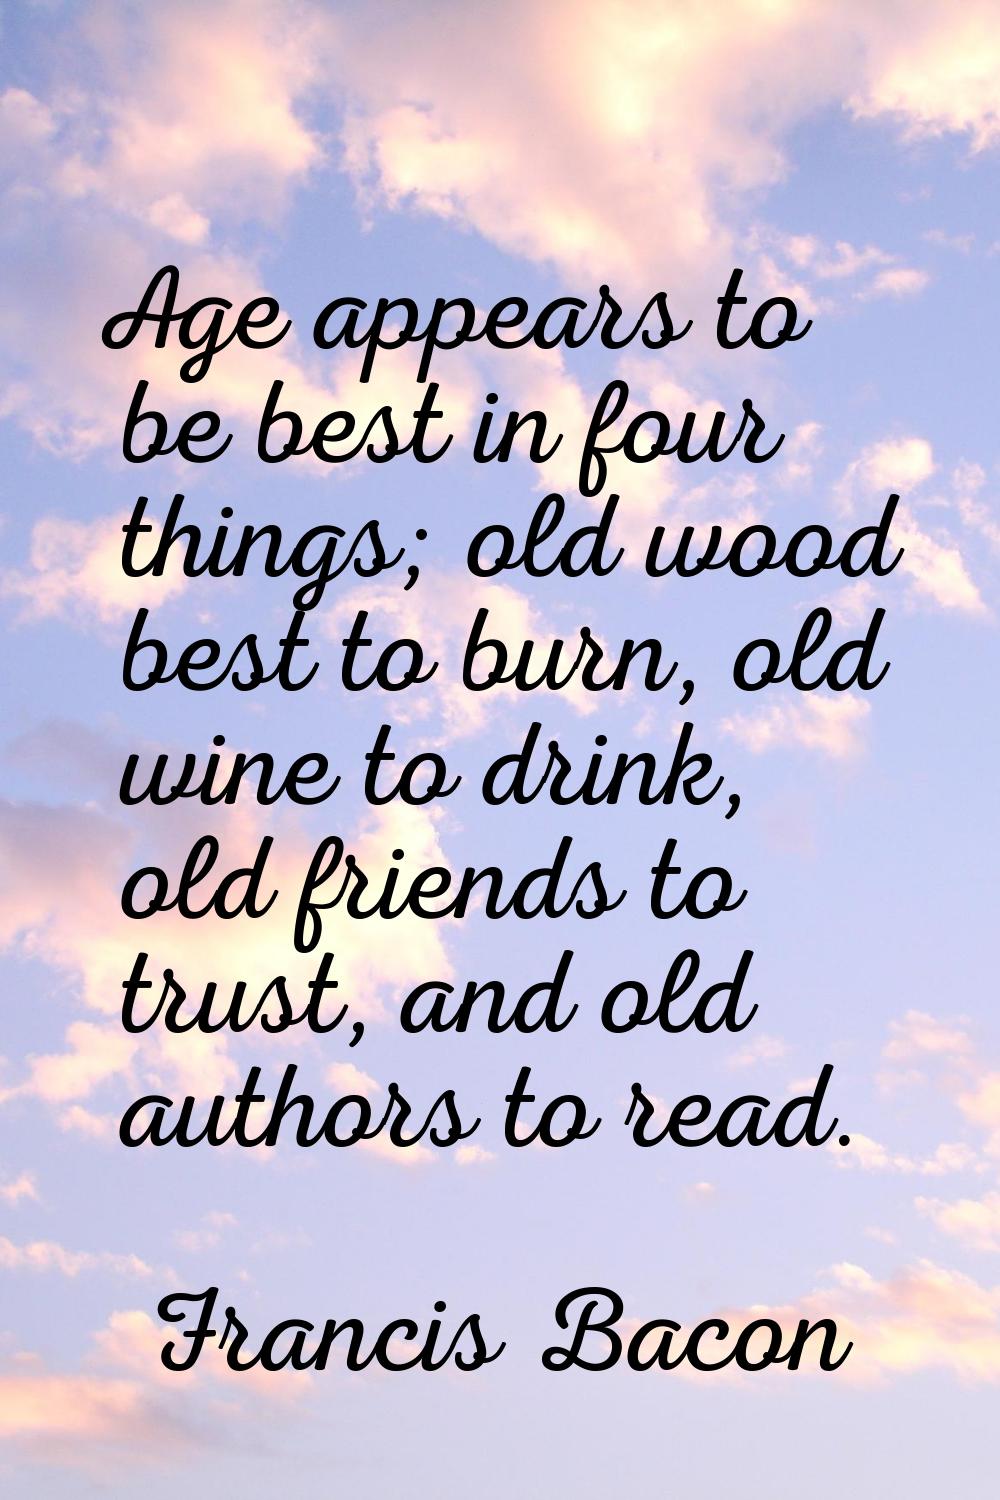 Age appears to be best in four things; old wood best to burn, old wine to drink, old friends to tru